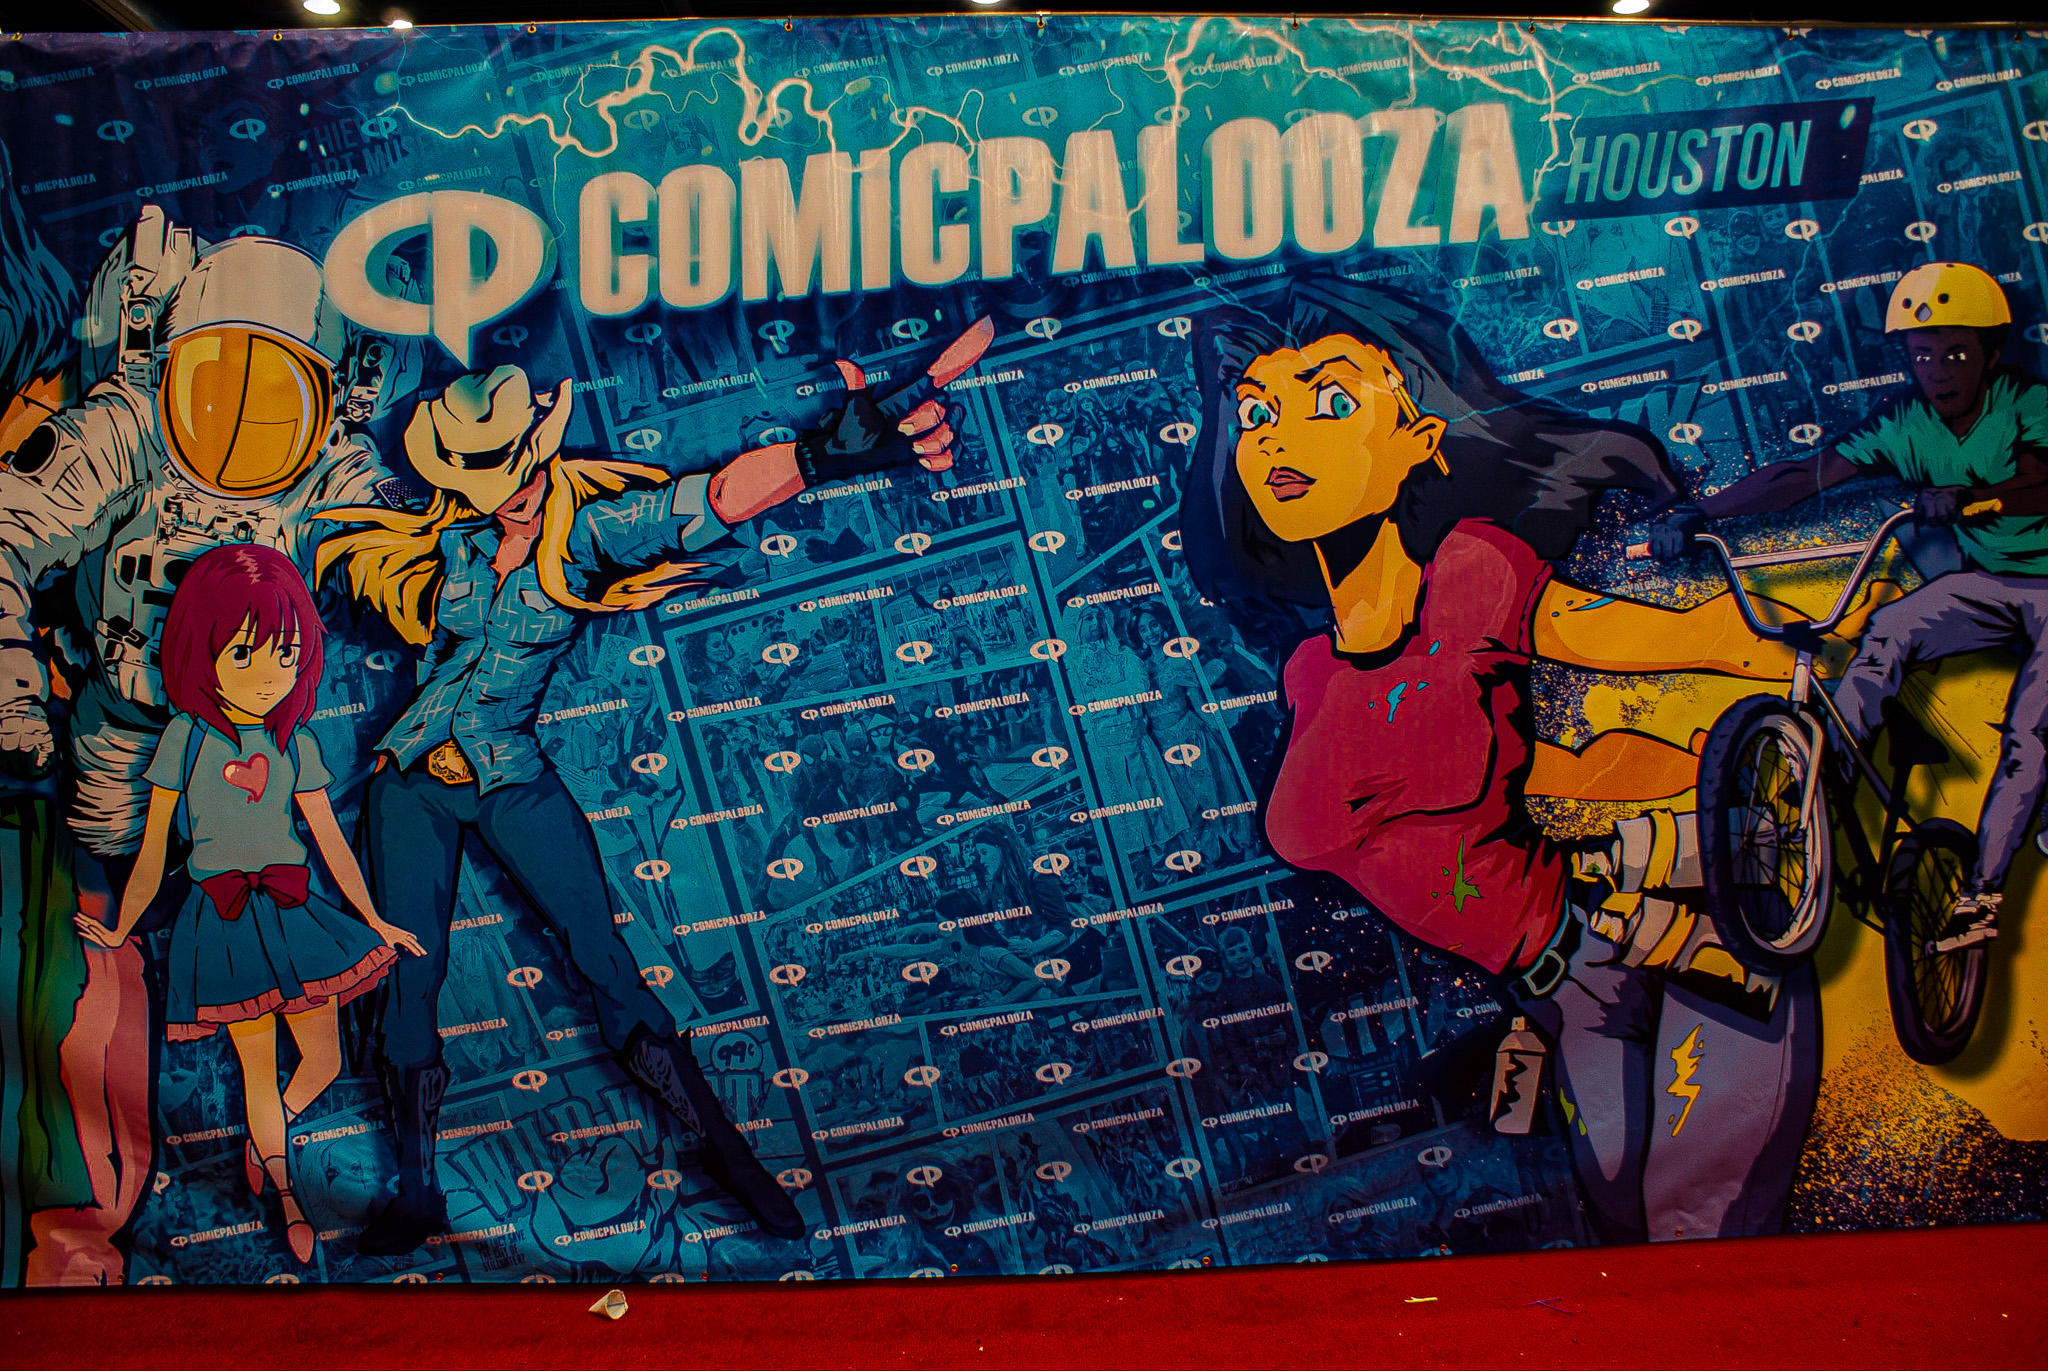 The red carpet of Comicpalooza where many can show off their cosplays in highly photogenic areas. Photo by reporter Adan Martinez.